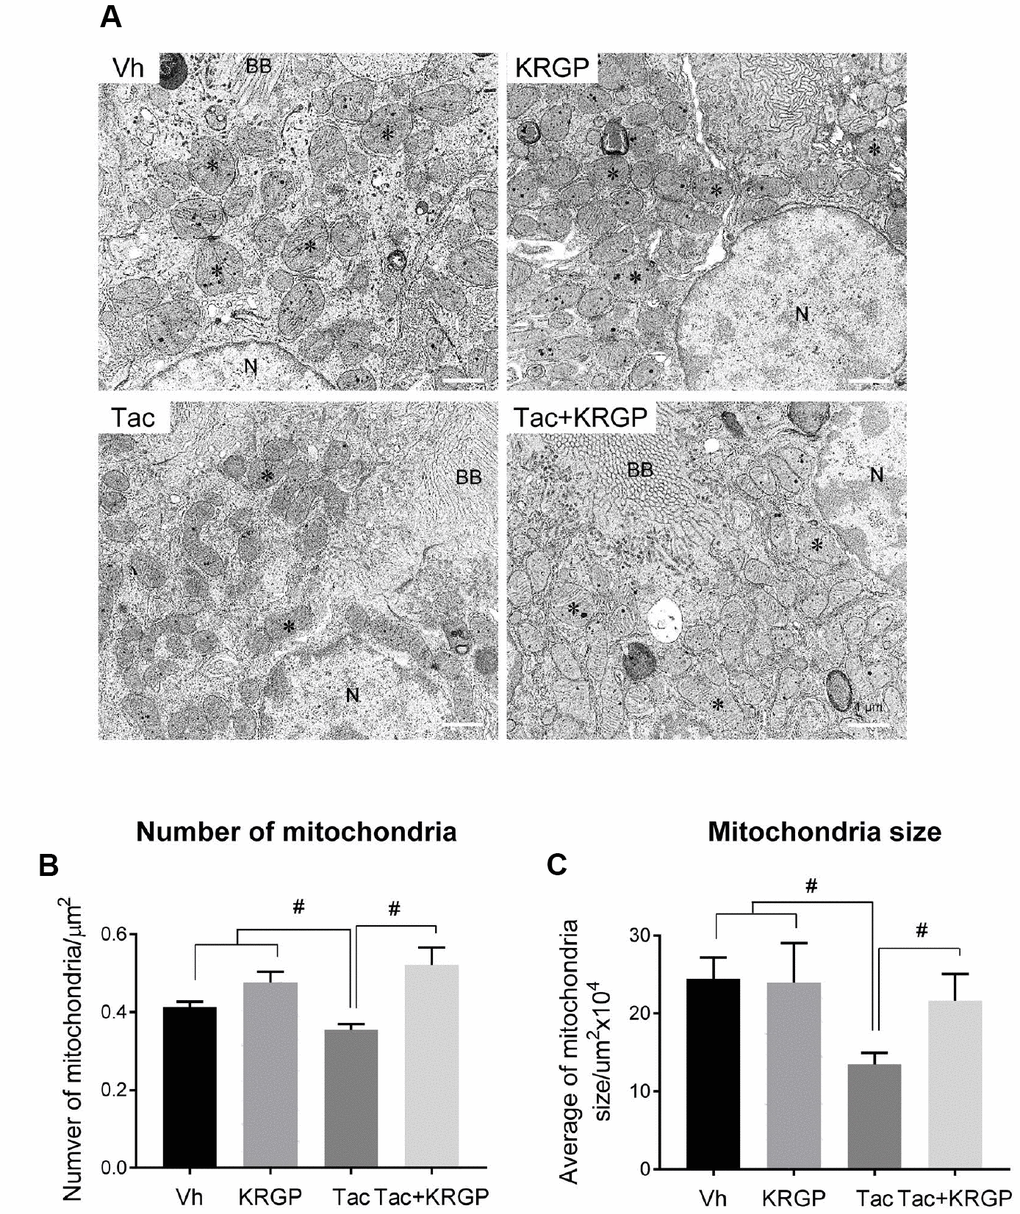 Effect of KRGP administration on Tac-induced mitochondrial ultrastructure in a mouse model. (A) Representative transmission electron micrographs of mitochondrial ultrastructure in the proximal tubules. Asterisks indicate mitochondria. (B and C) Quantitative analysis of number and size of mitochondria. BB, brush border. N, Nucleus. Bar = 1 μm. Data are presented as mean ± SE. n = 8. #P 